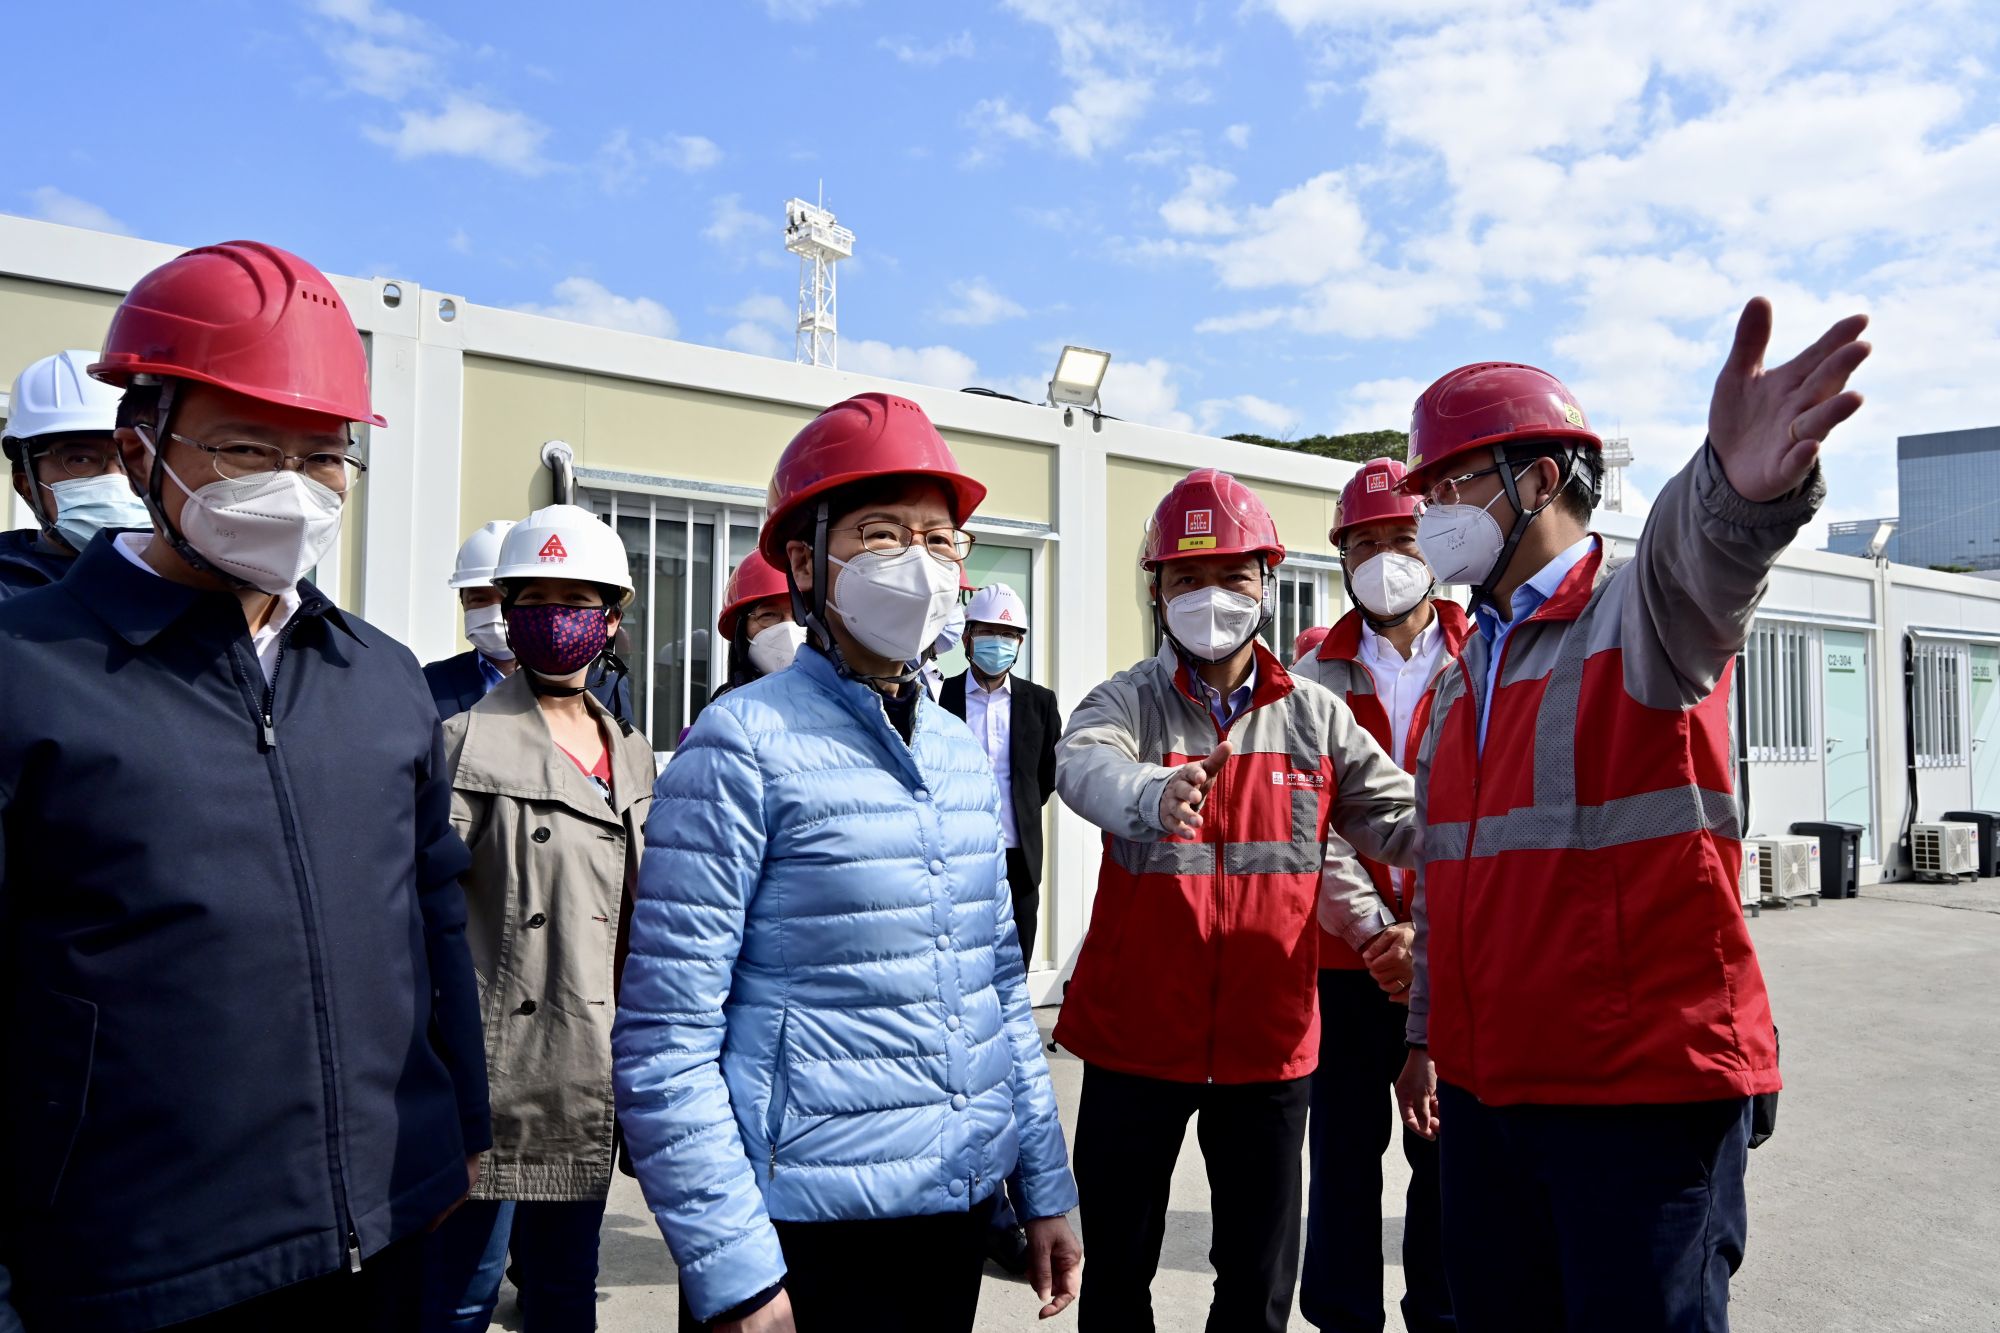 The Chief Executive, Mrs Carrie LAM, visited the community isolation facility (CIF) in Tsing Yi constructed with the Mainland’s support earlier on (28 February). Photo shows Mrs Carrie LAM (front, second left), accompanied by the Chairman and Non-executive Director of the China State Construction International Holdings Limited, Mr YAN Jianguo (front, second right), was briefed by a staff member of the contractor on the facilities. Beside her is the Deputy Director of the Liaison Office of the Central People’s Government in the Hong Kong Special Administrative Region, Mr CHEN Dong (front, first left).